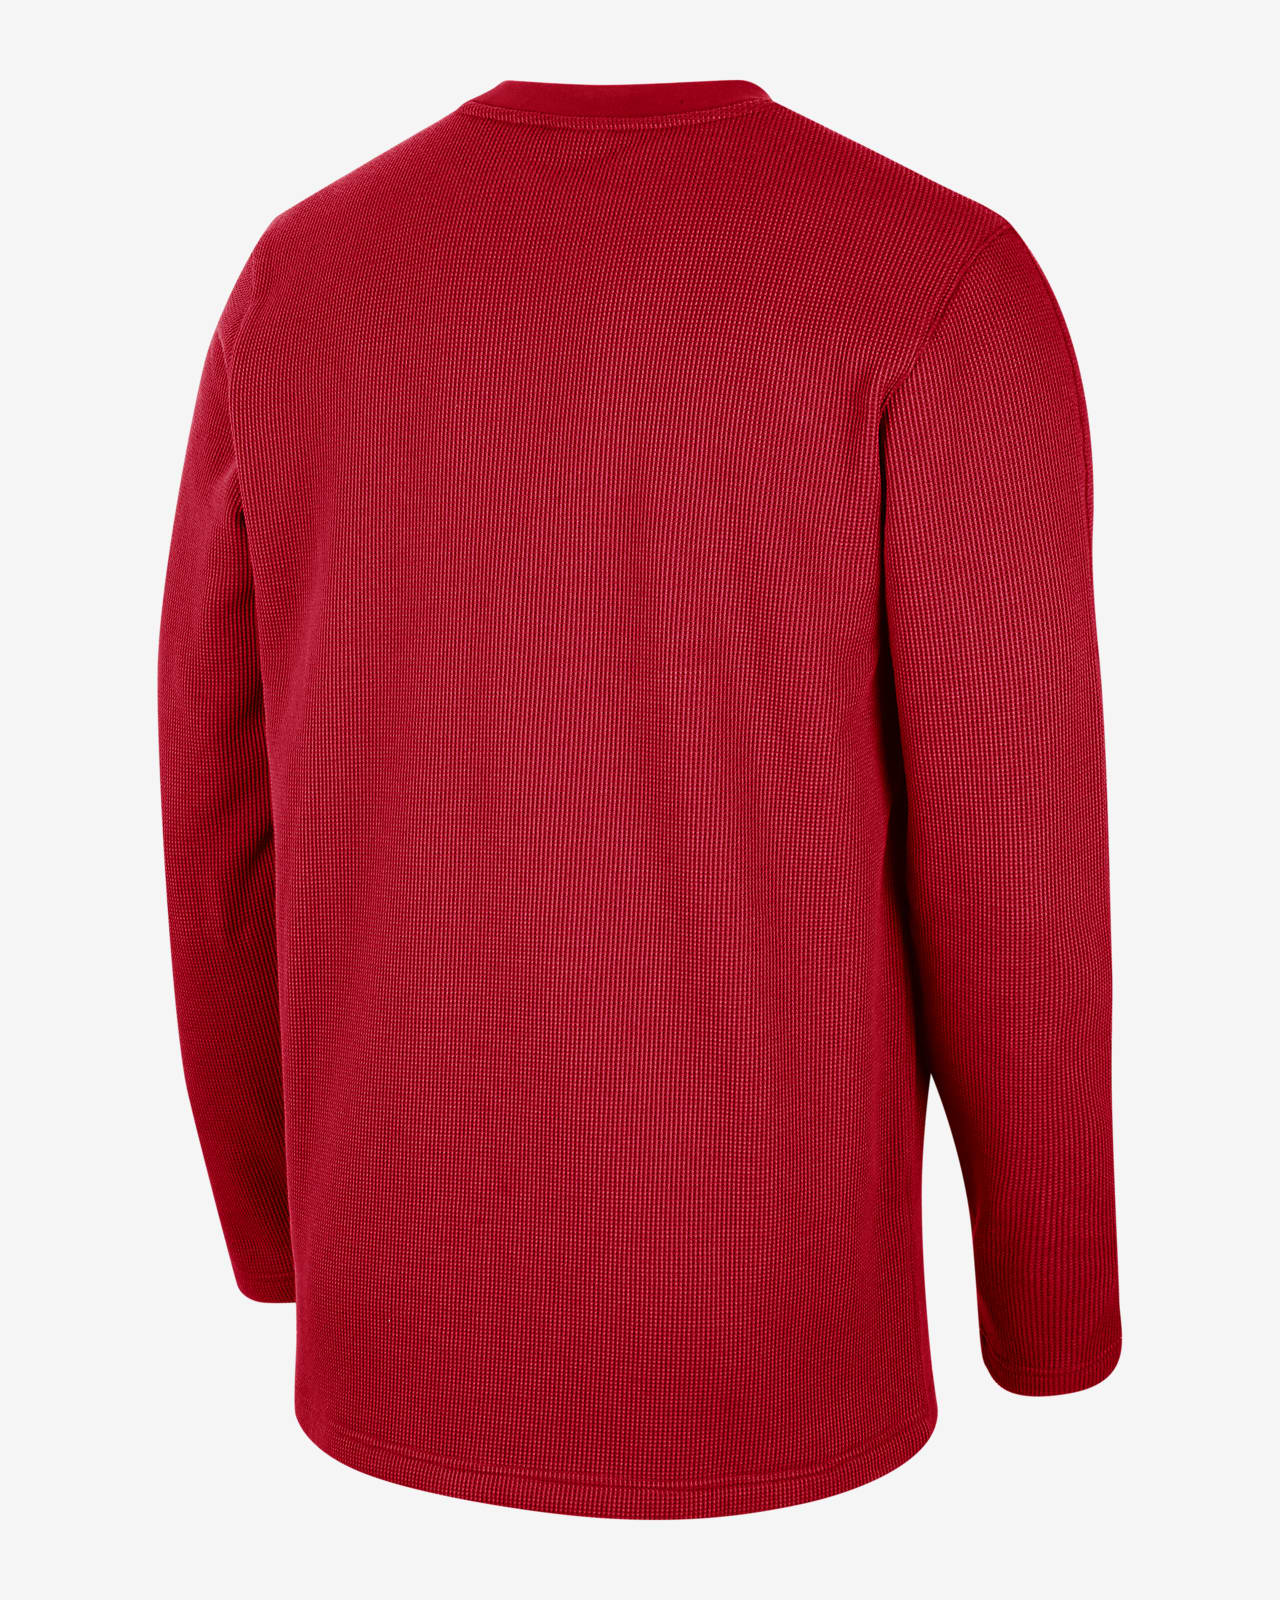 Ohio State Men's Nike Dri-FIT College Hooded Long-Sleeve T-Shirt.